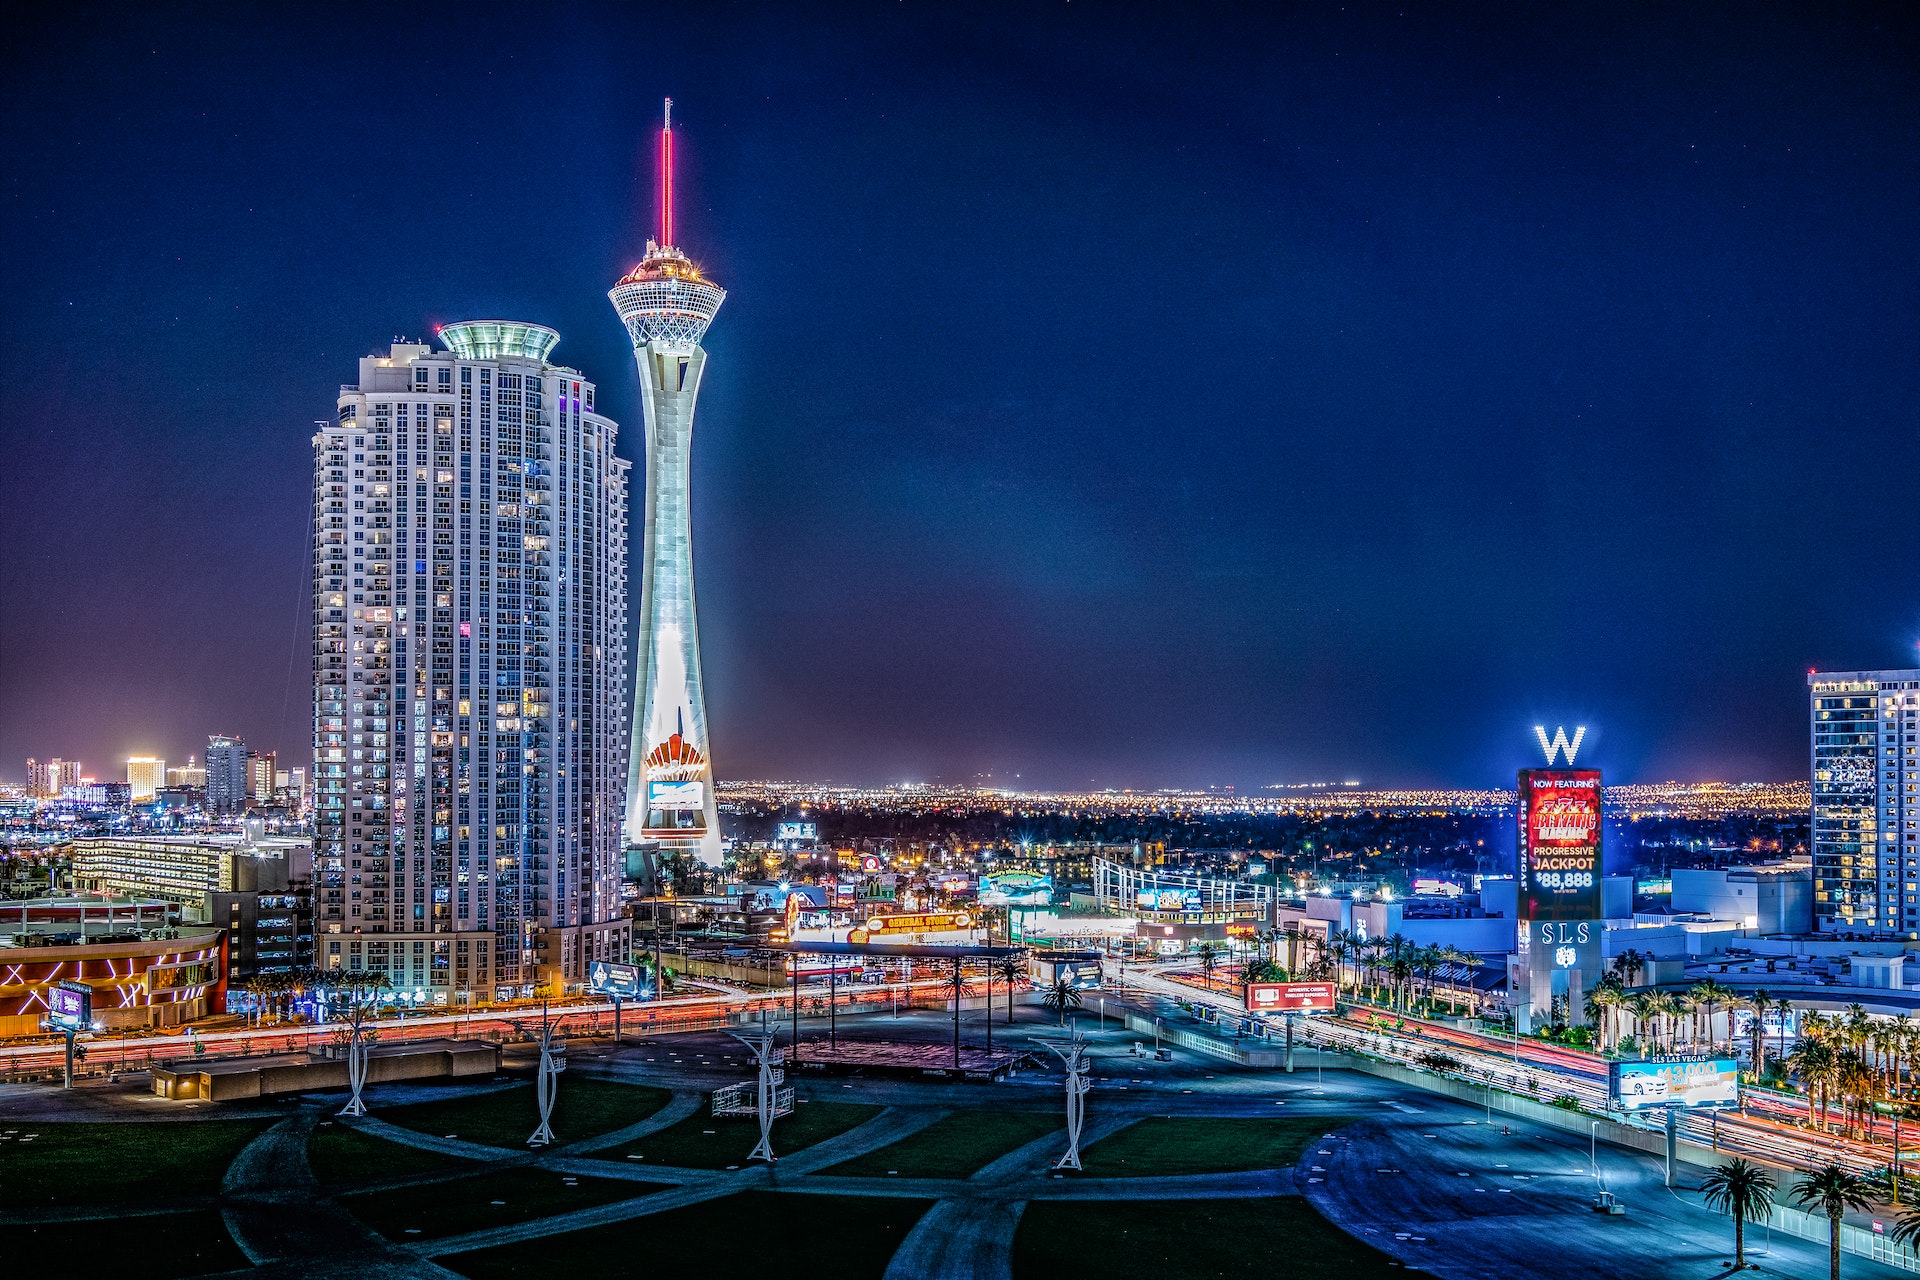 The Most Interesting Casino Designs In The World